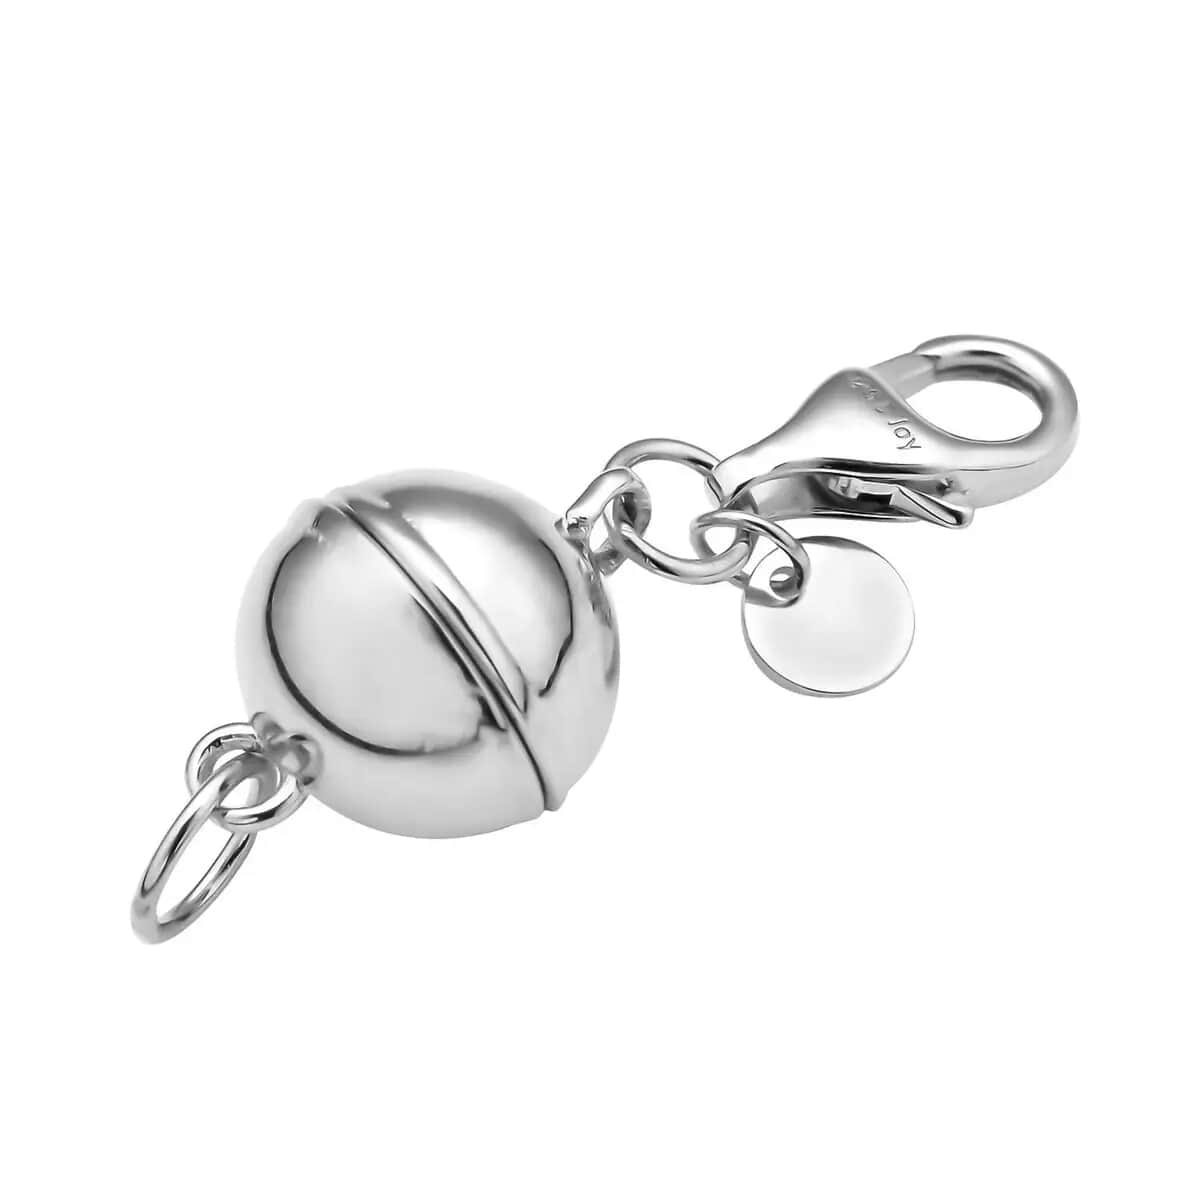 Rhodium Over Sterling Silver Magnetic Lock, Jewelry Lock with Lobster Clasp, Silver Jewelry Clasp, Round Magnetic Lock in Silver 2.50 Grams (Del. in 5-7 Days) image number 4